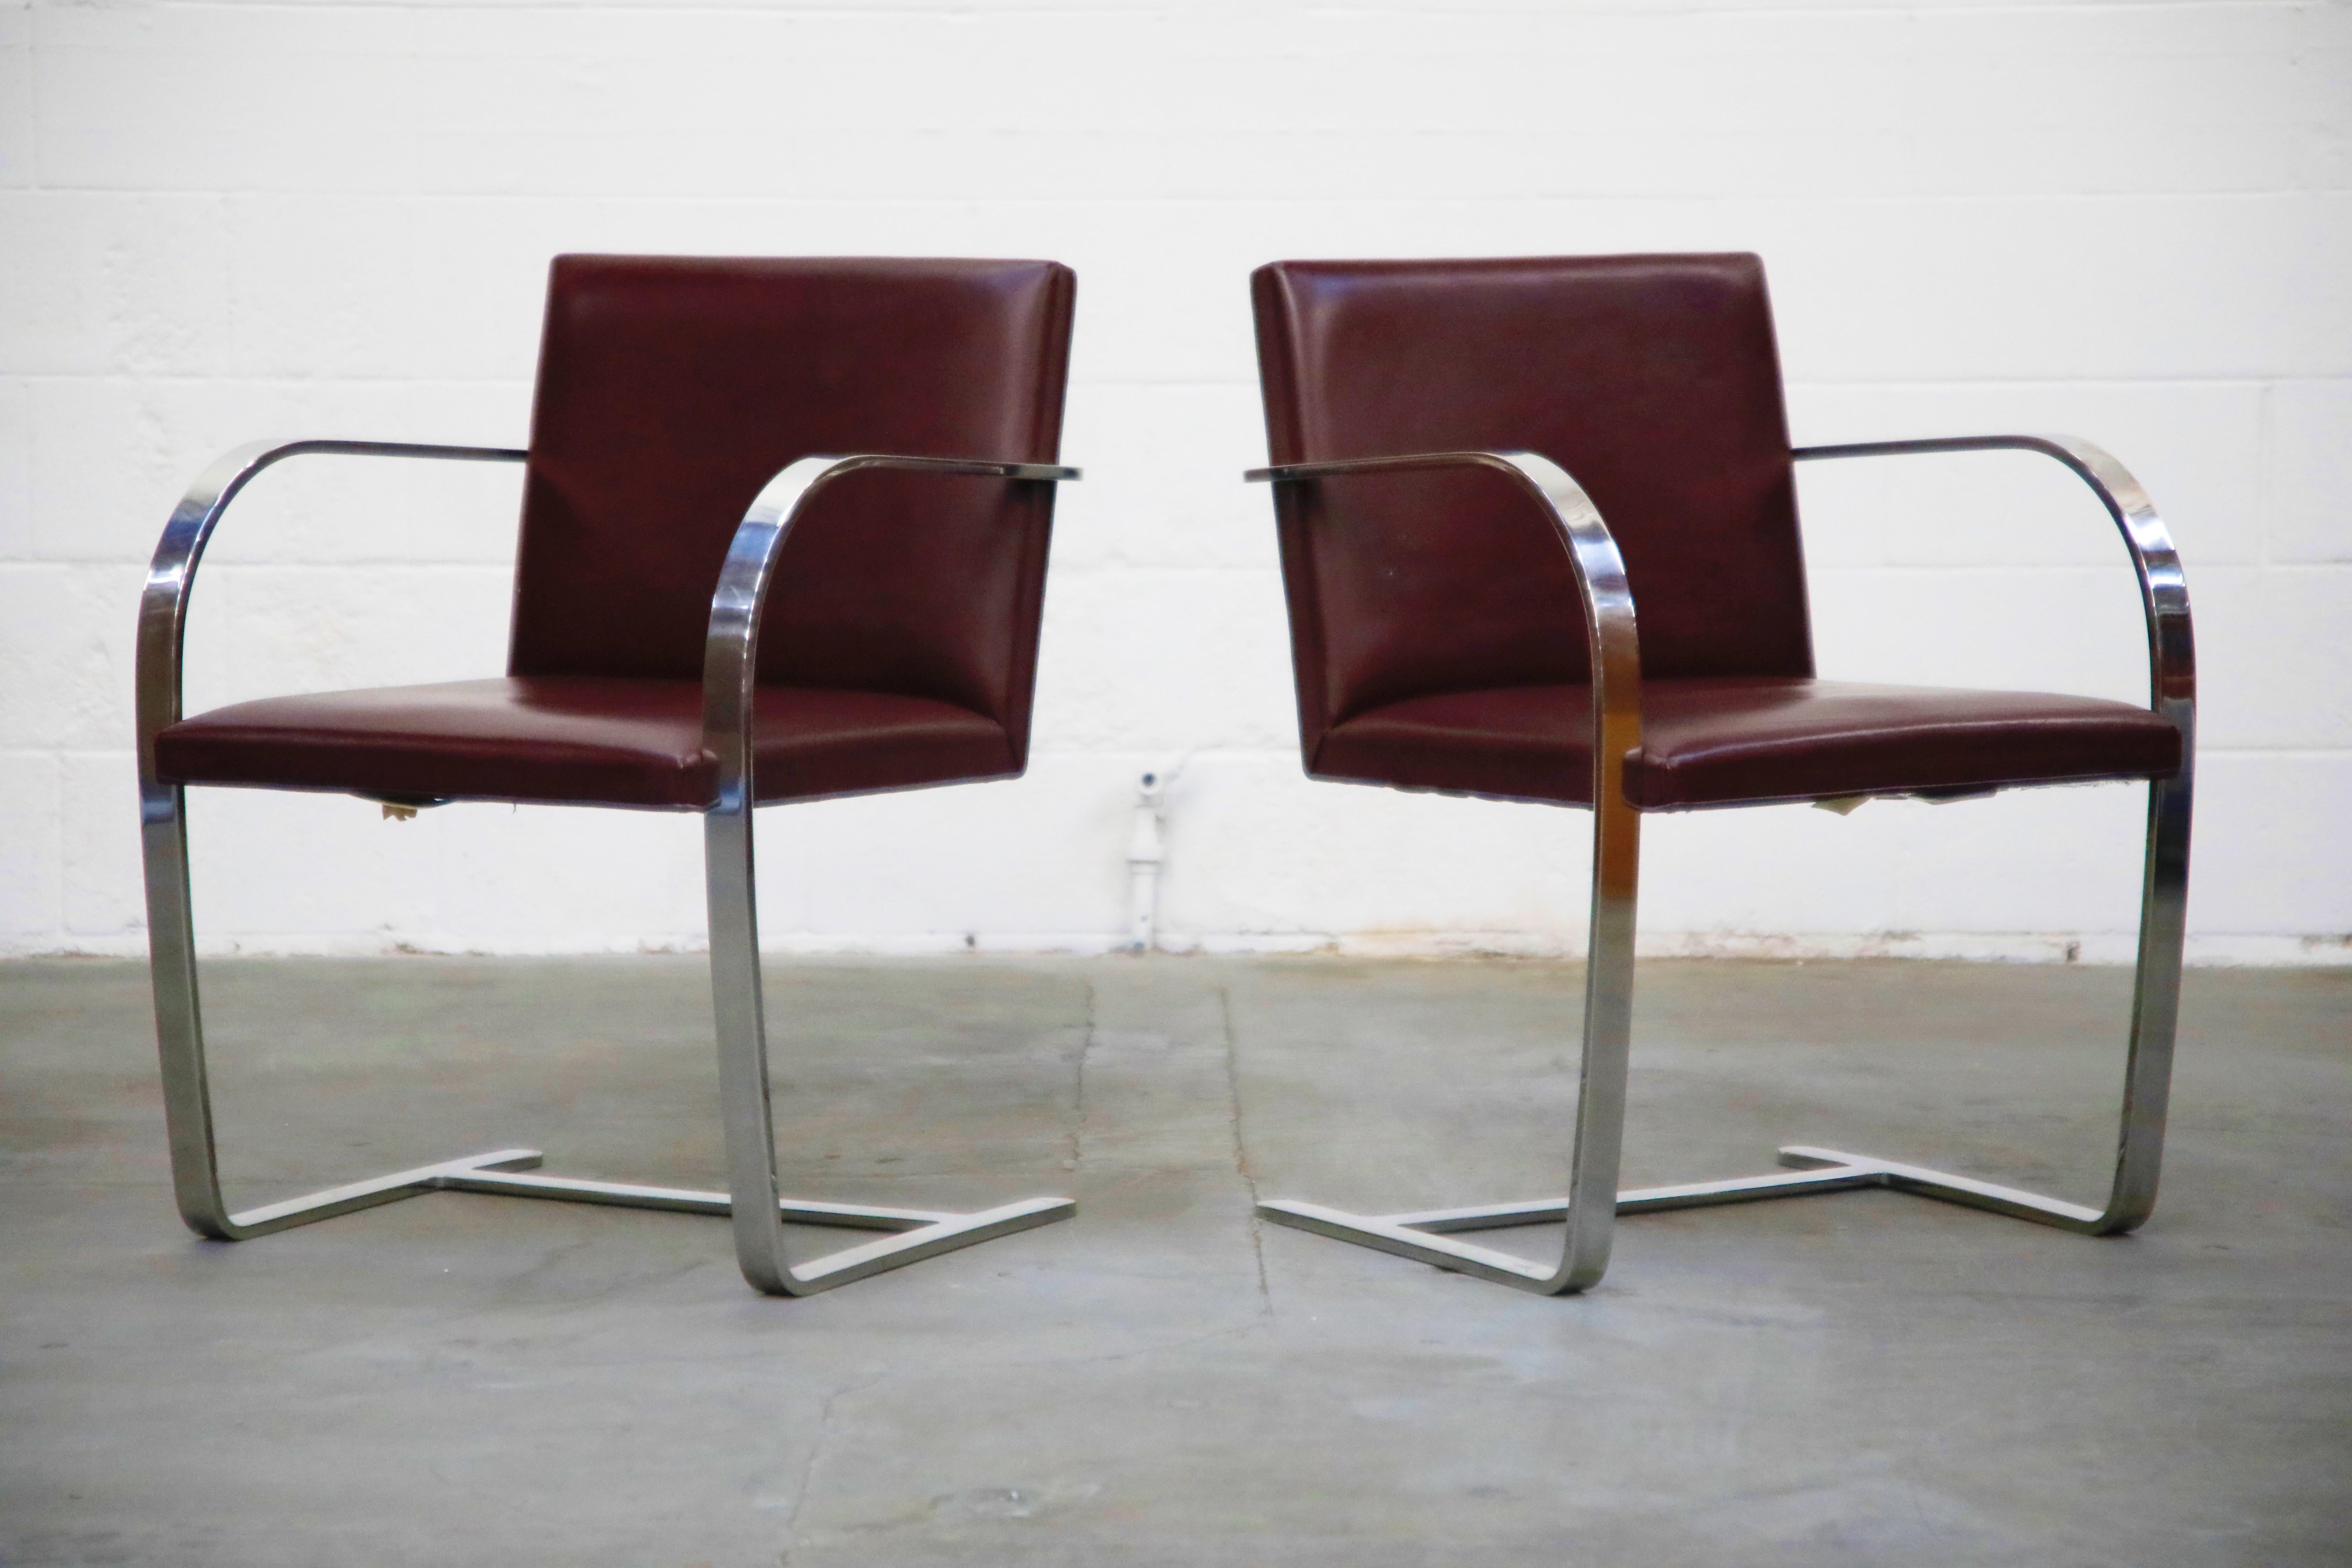 Mid-20th Century Knoll International Burgundy Leather 'Brno' Chairs by Mies van der Rohe, Signed